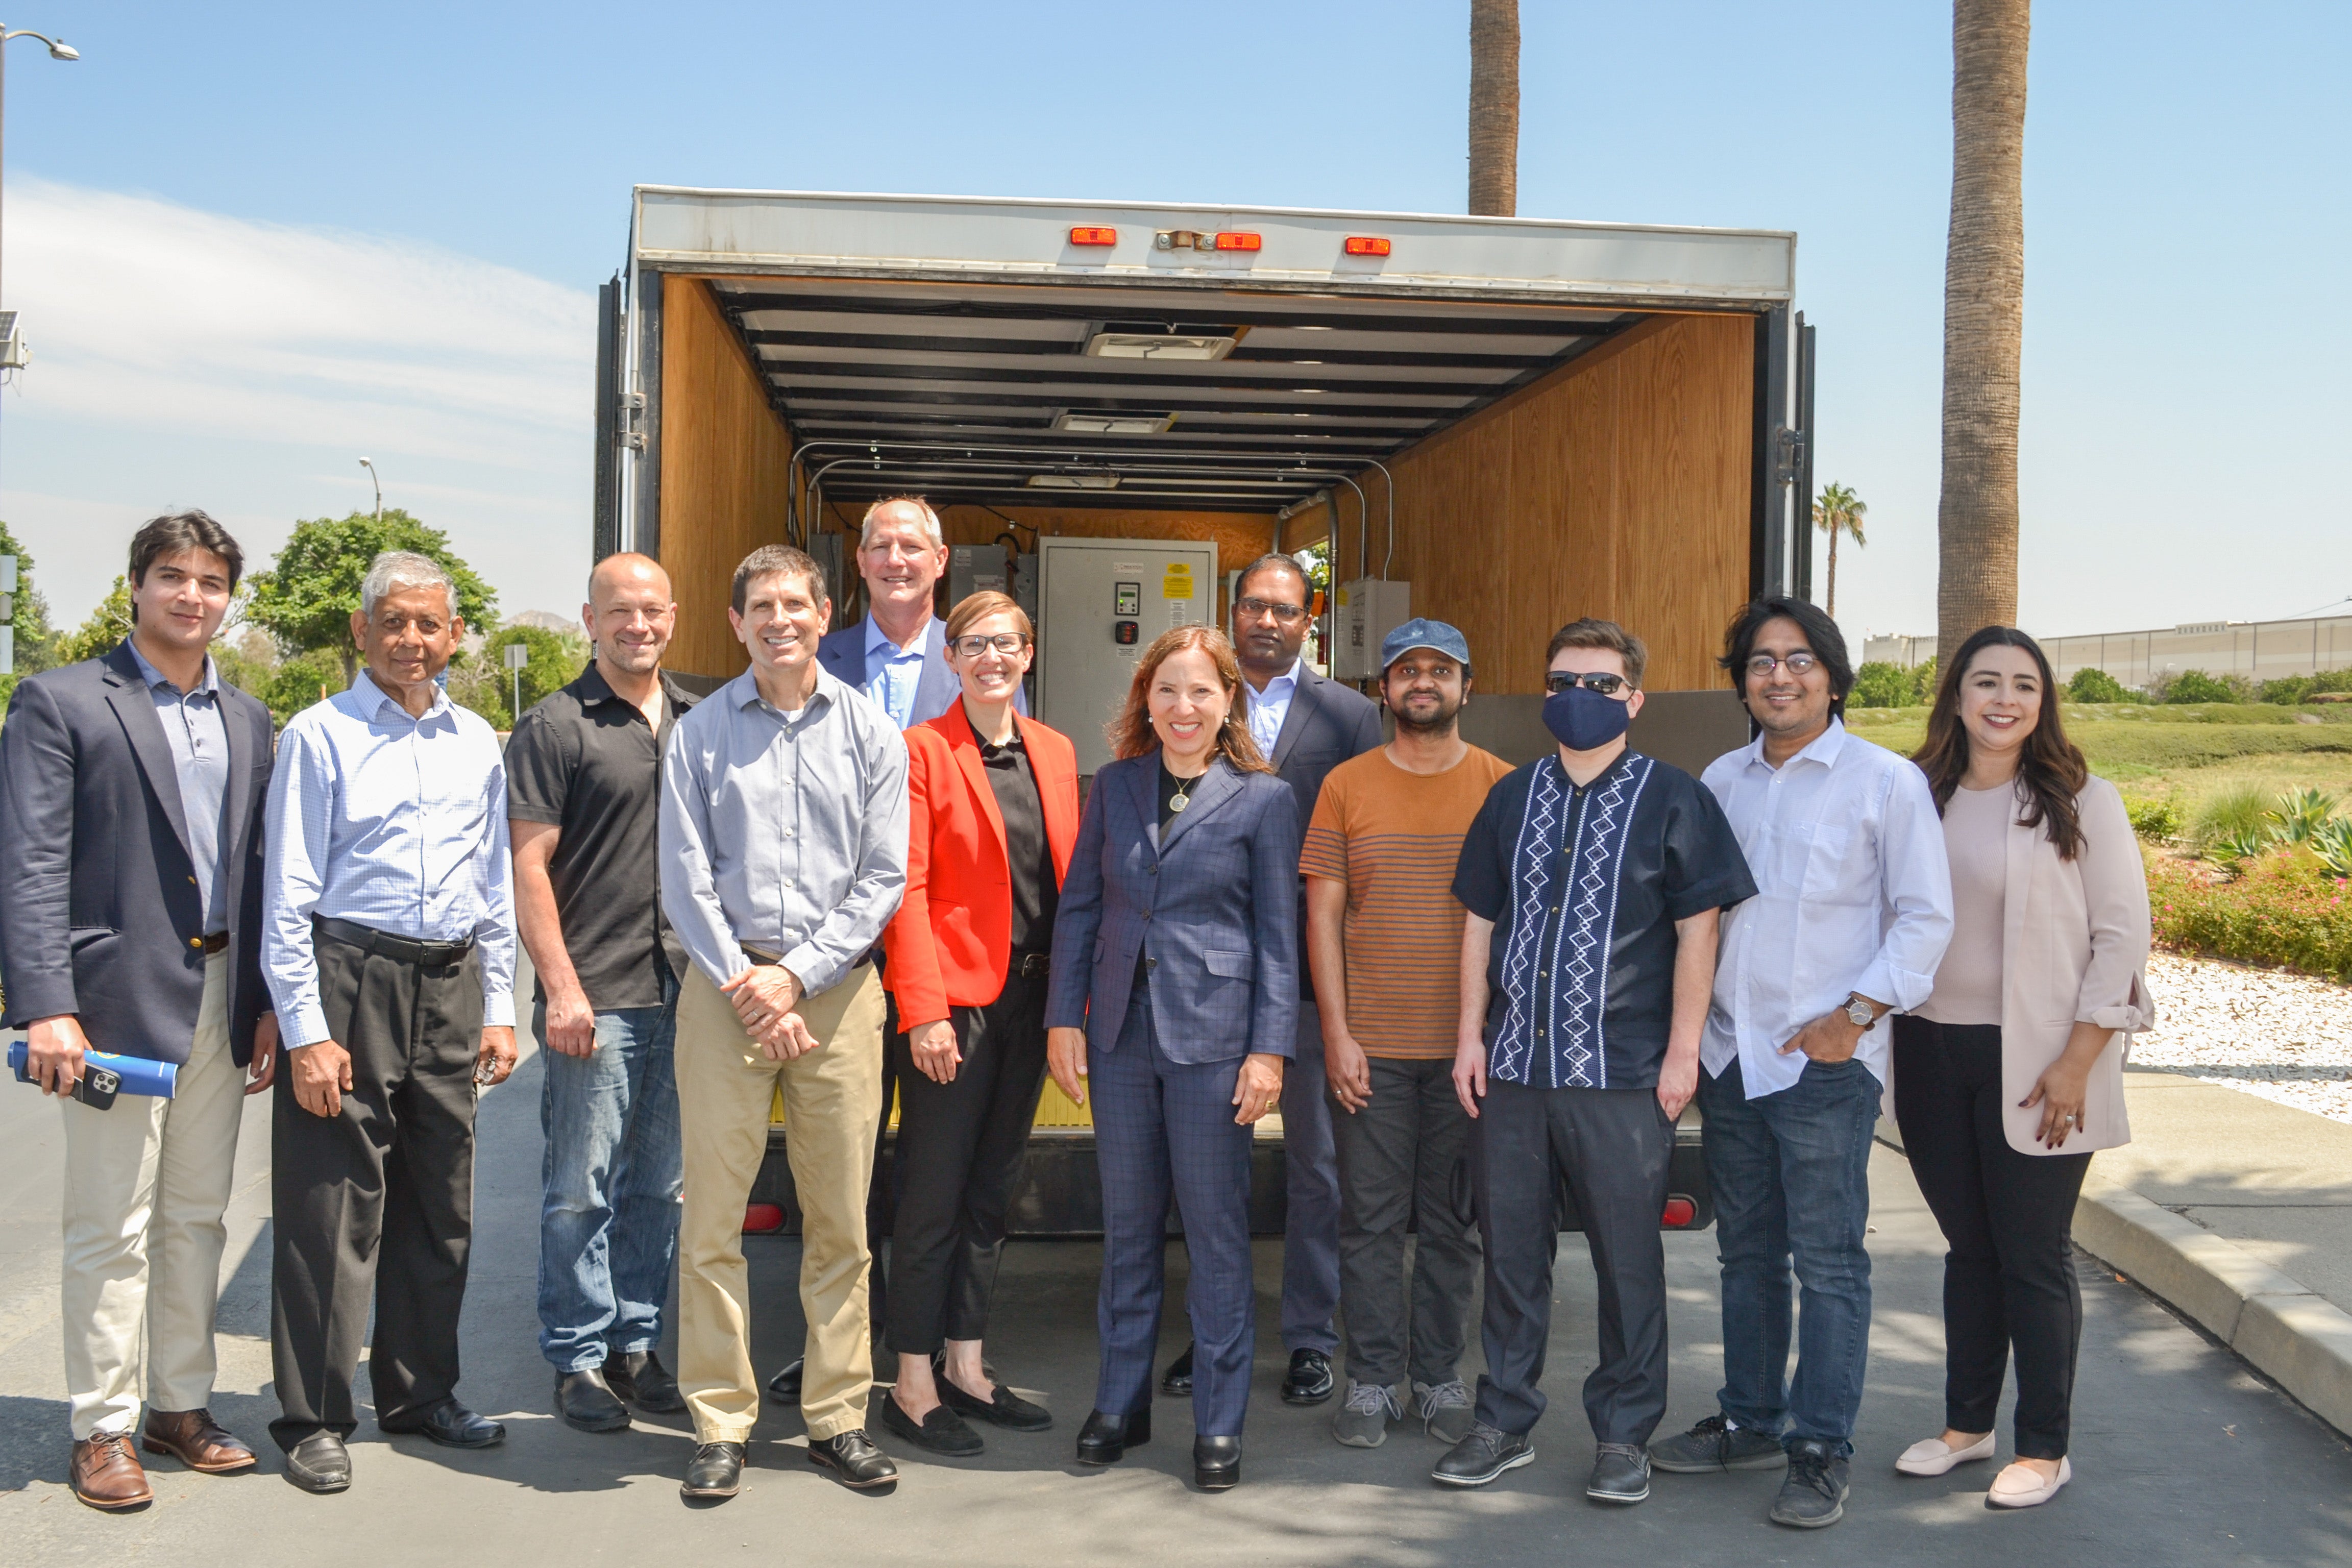 Lt. Governor Kounalakis and CE-CERT researchers in front of SIGI trailer